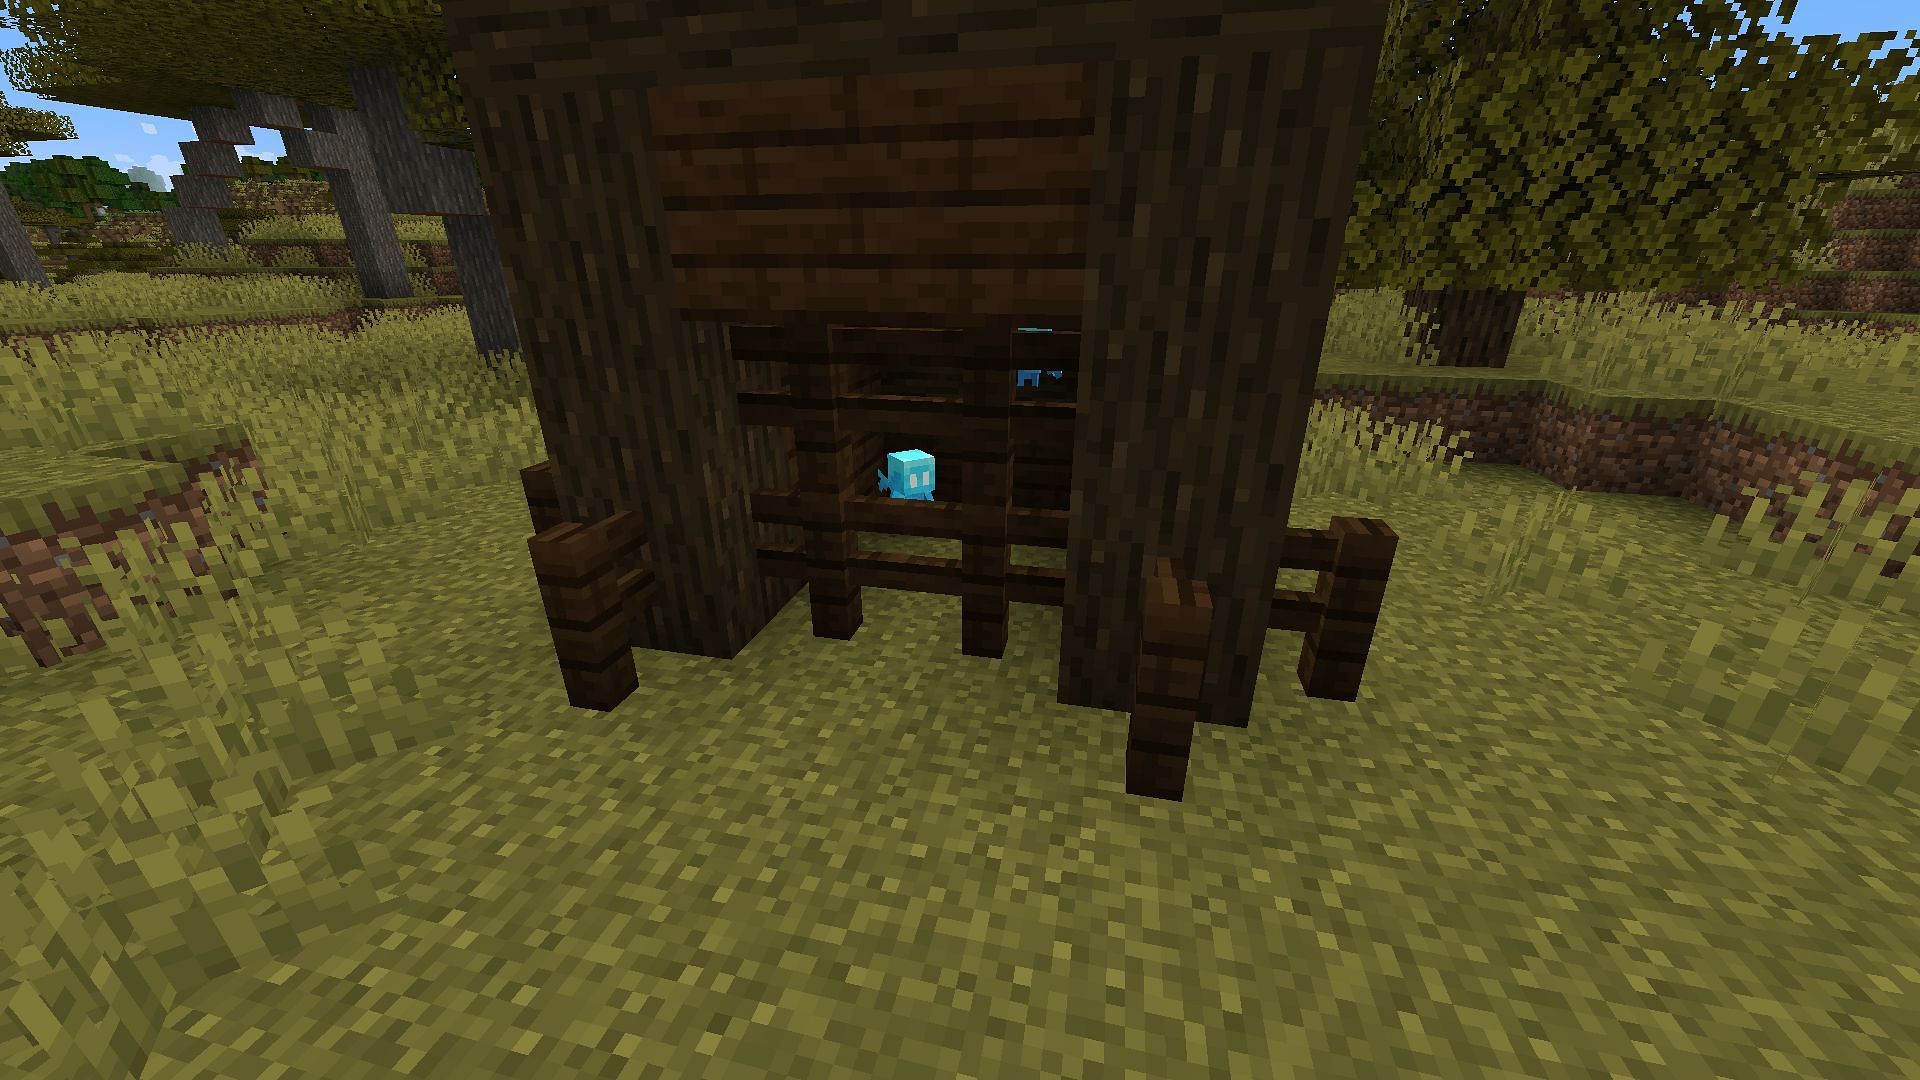 Allays in a player made cage (Image via Minecraft)